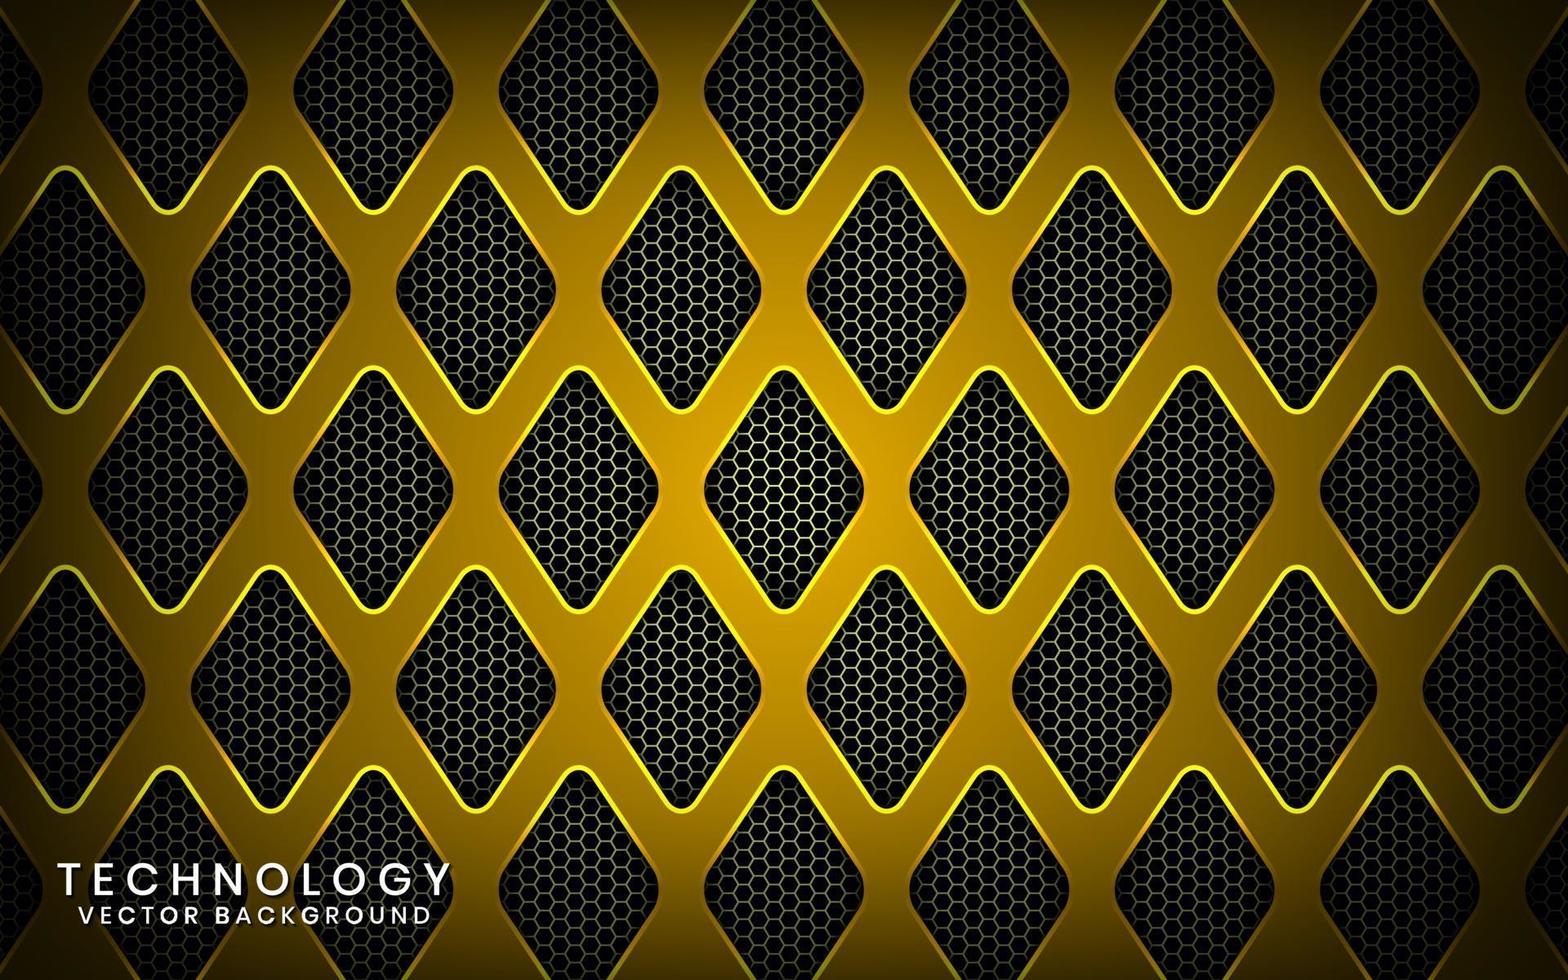 Abstract 3D yellow technology background with shiny effect. Overlap layers on dark space with textured metallic rhomb patterns. Graphic design template elements for poster, flyer, brochure, or banner vector